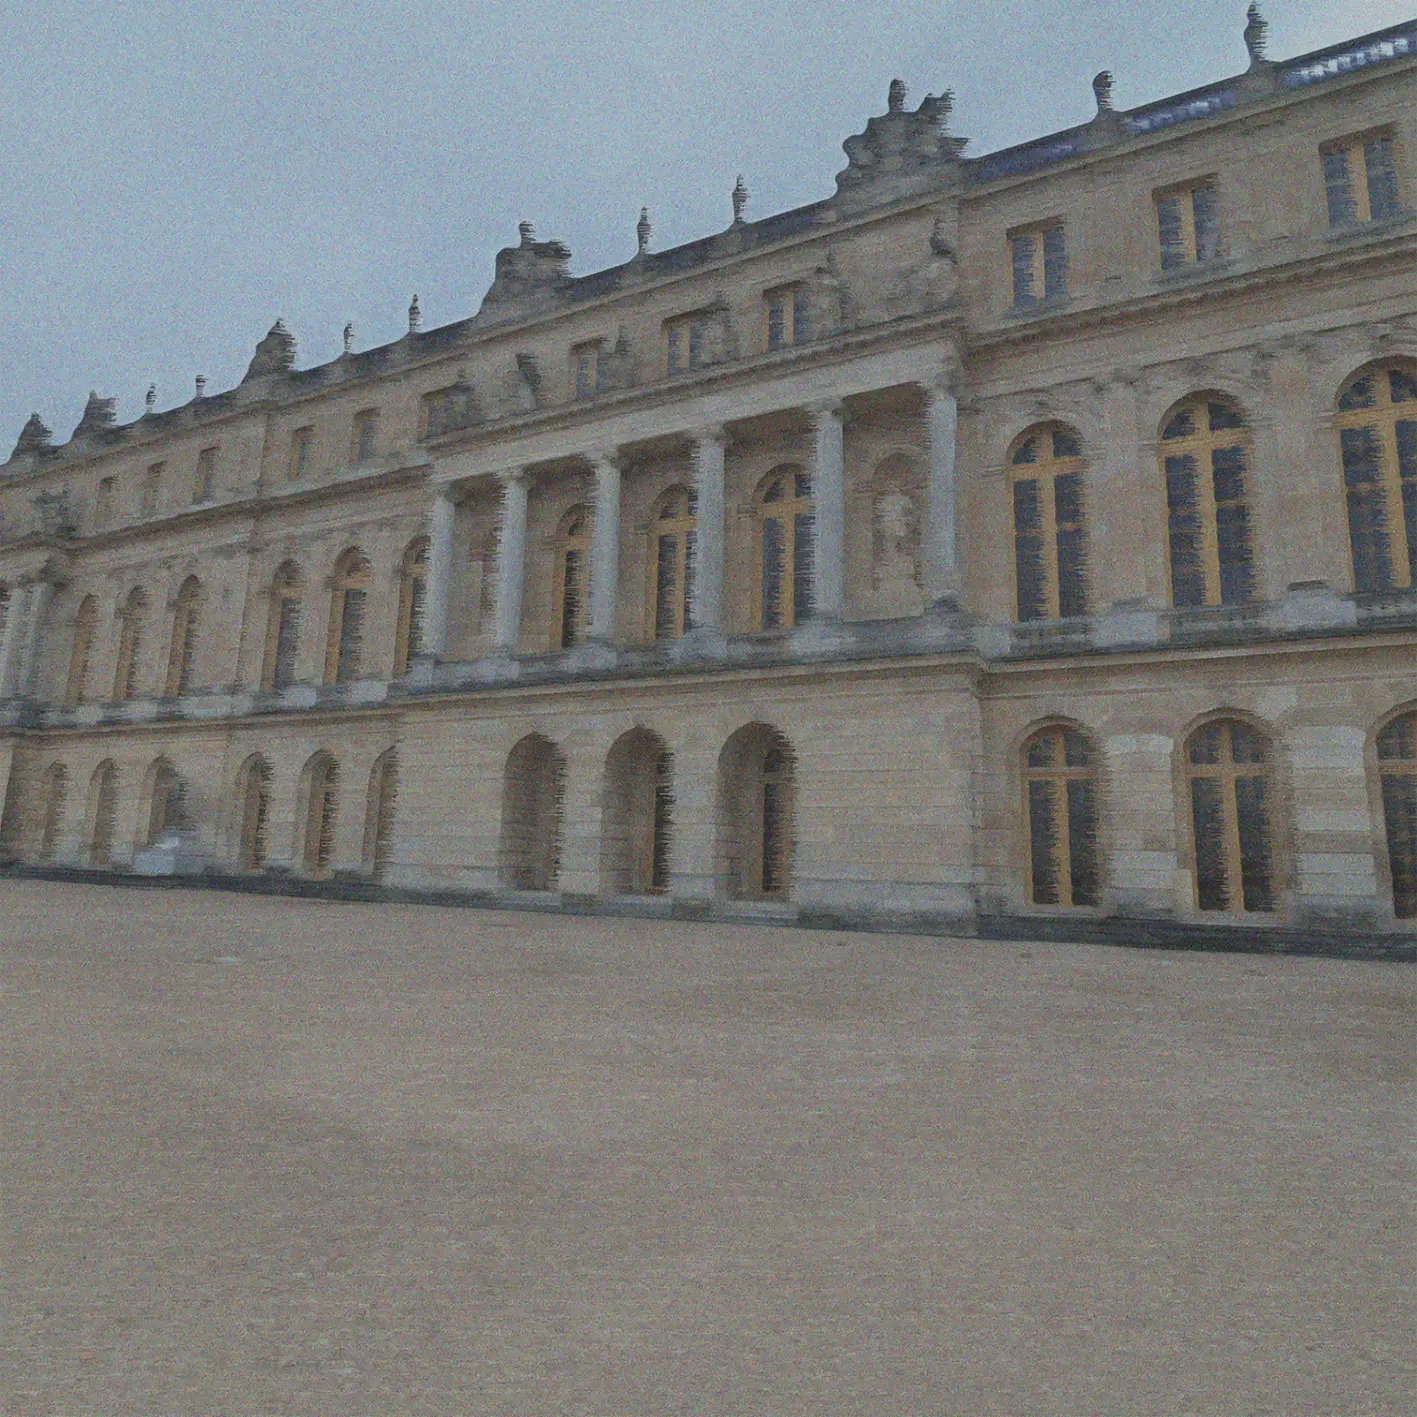 A stylized photo of the outside of the Palace of Versailles